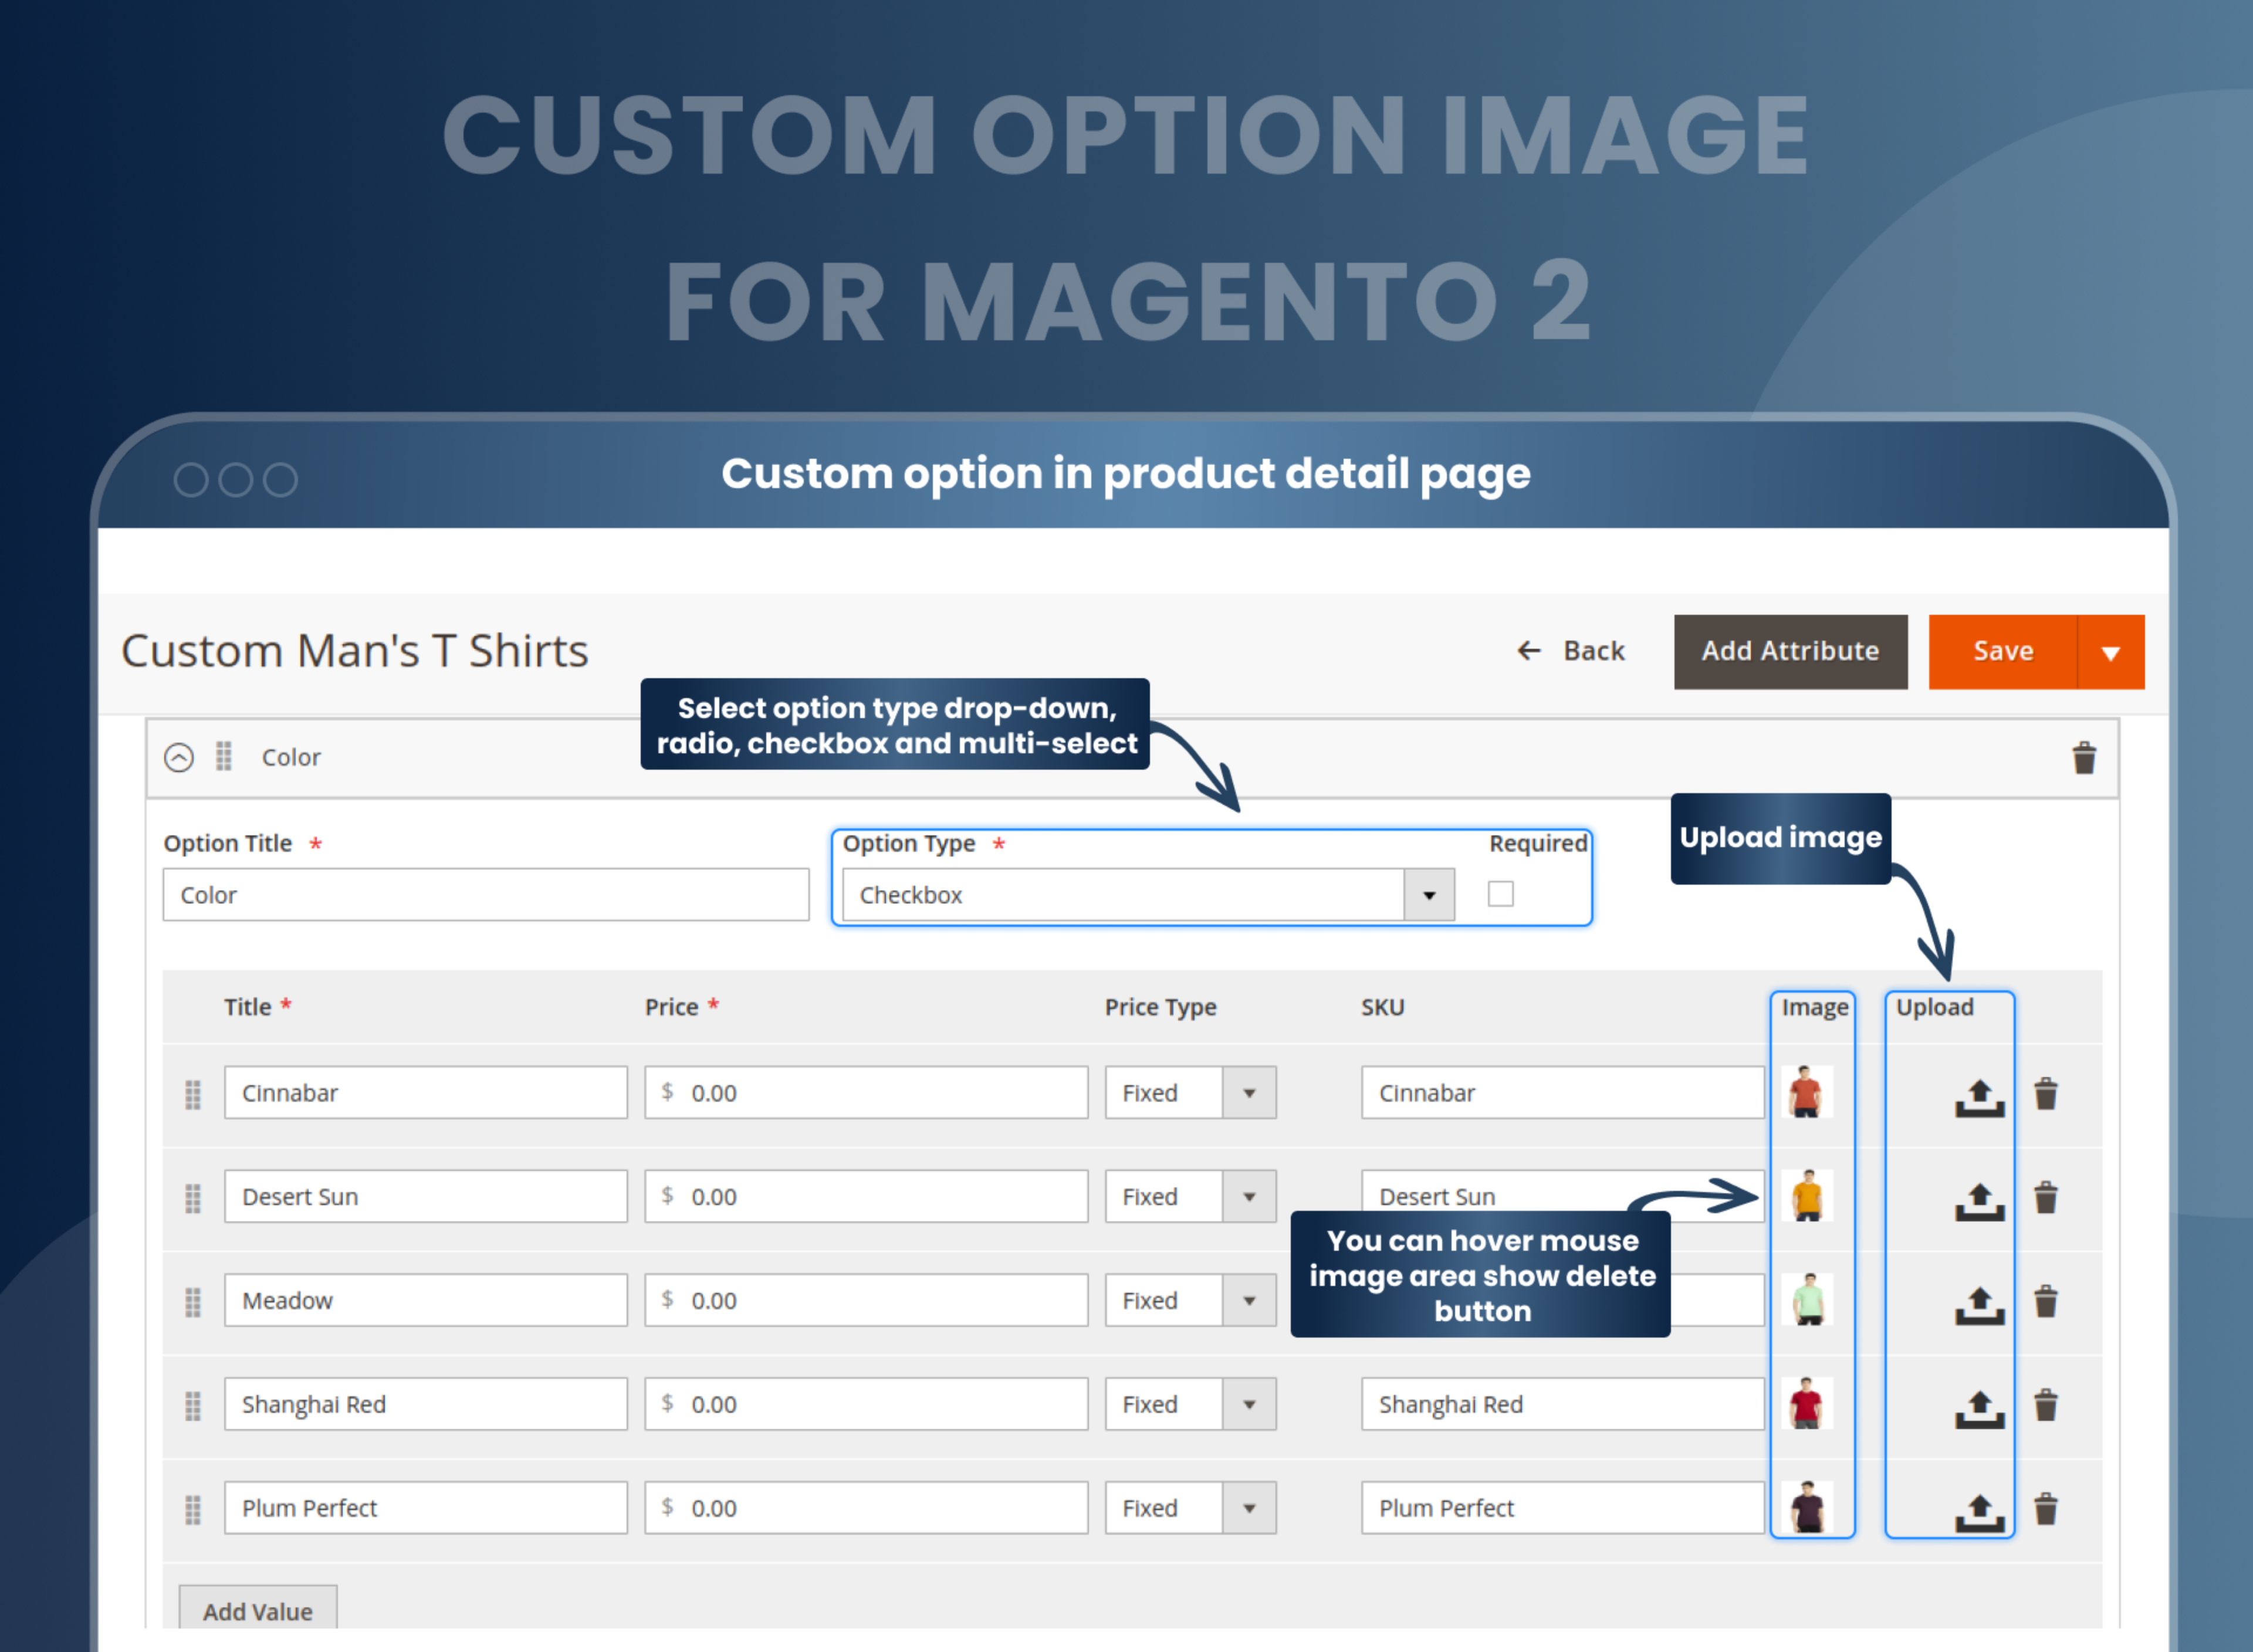  Custom option in product detail page